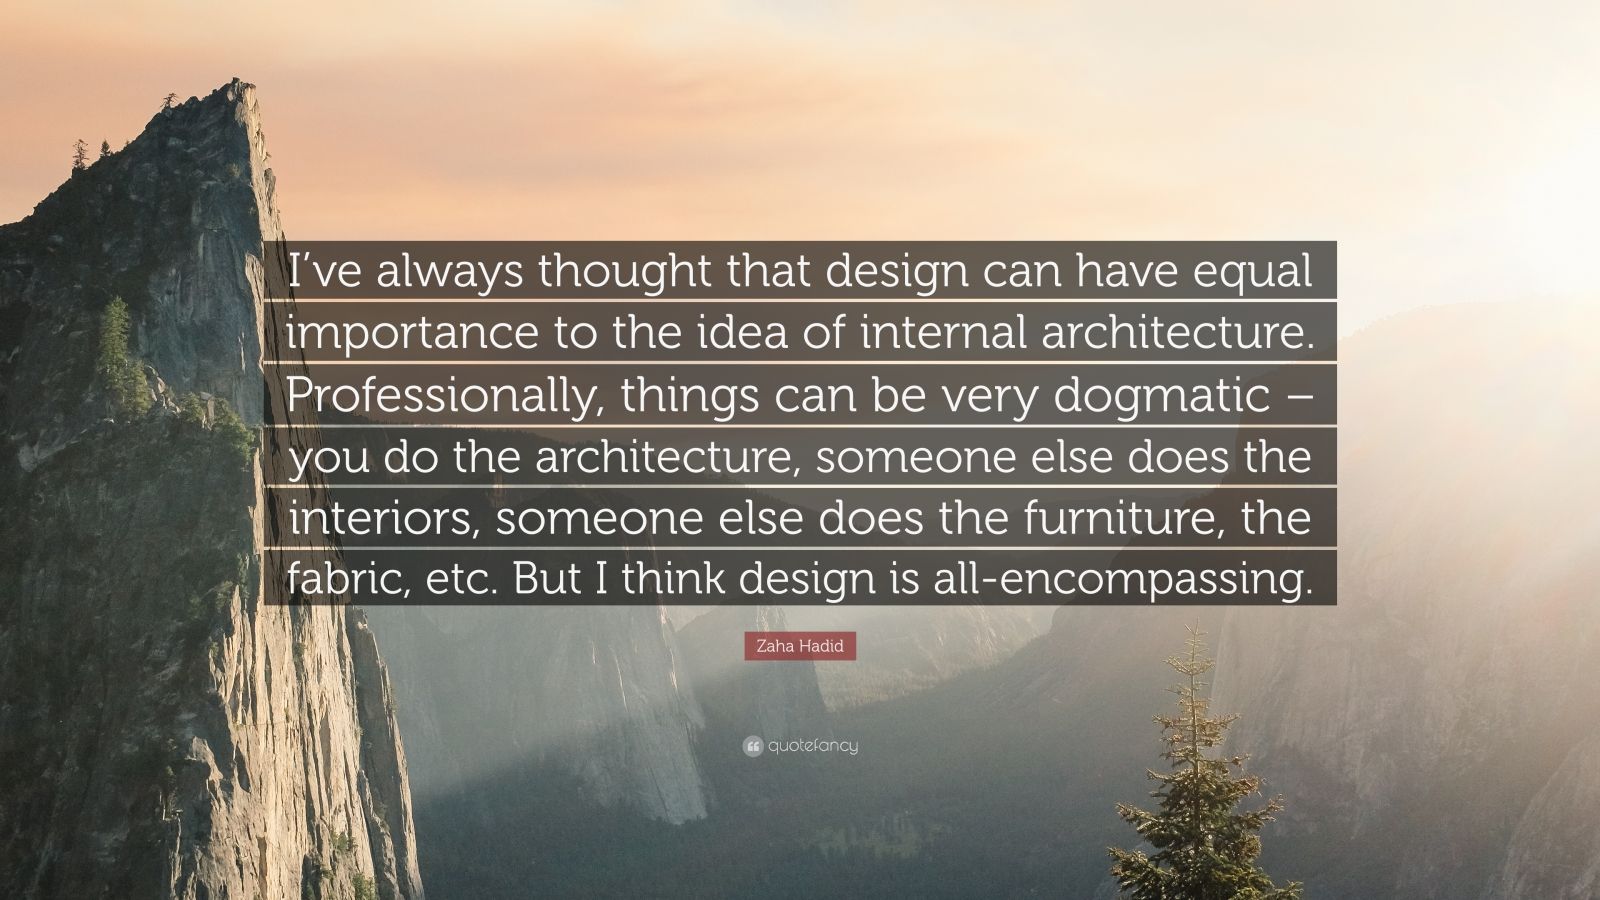 Zaha Hadid Quote: “I’ve always thought that design can have equal ...